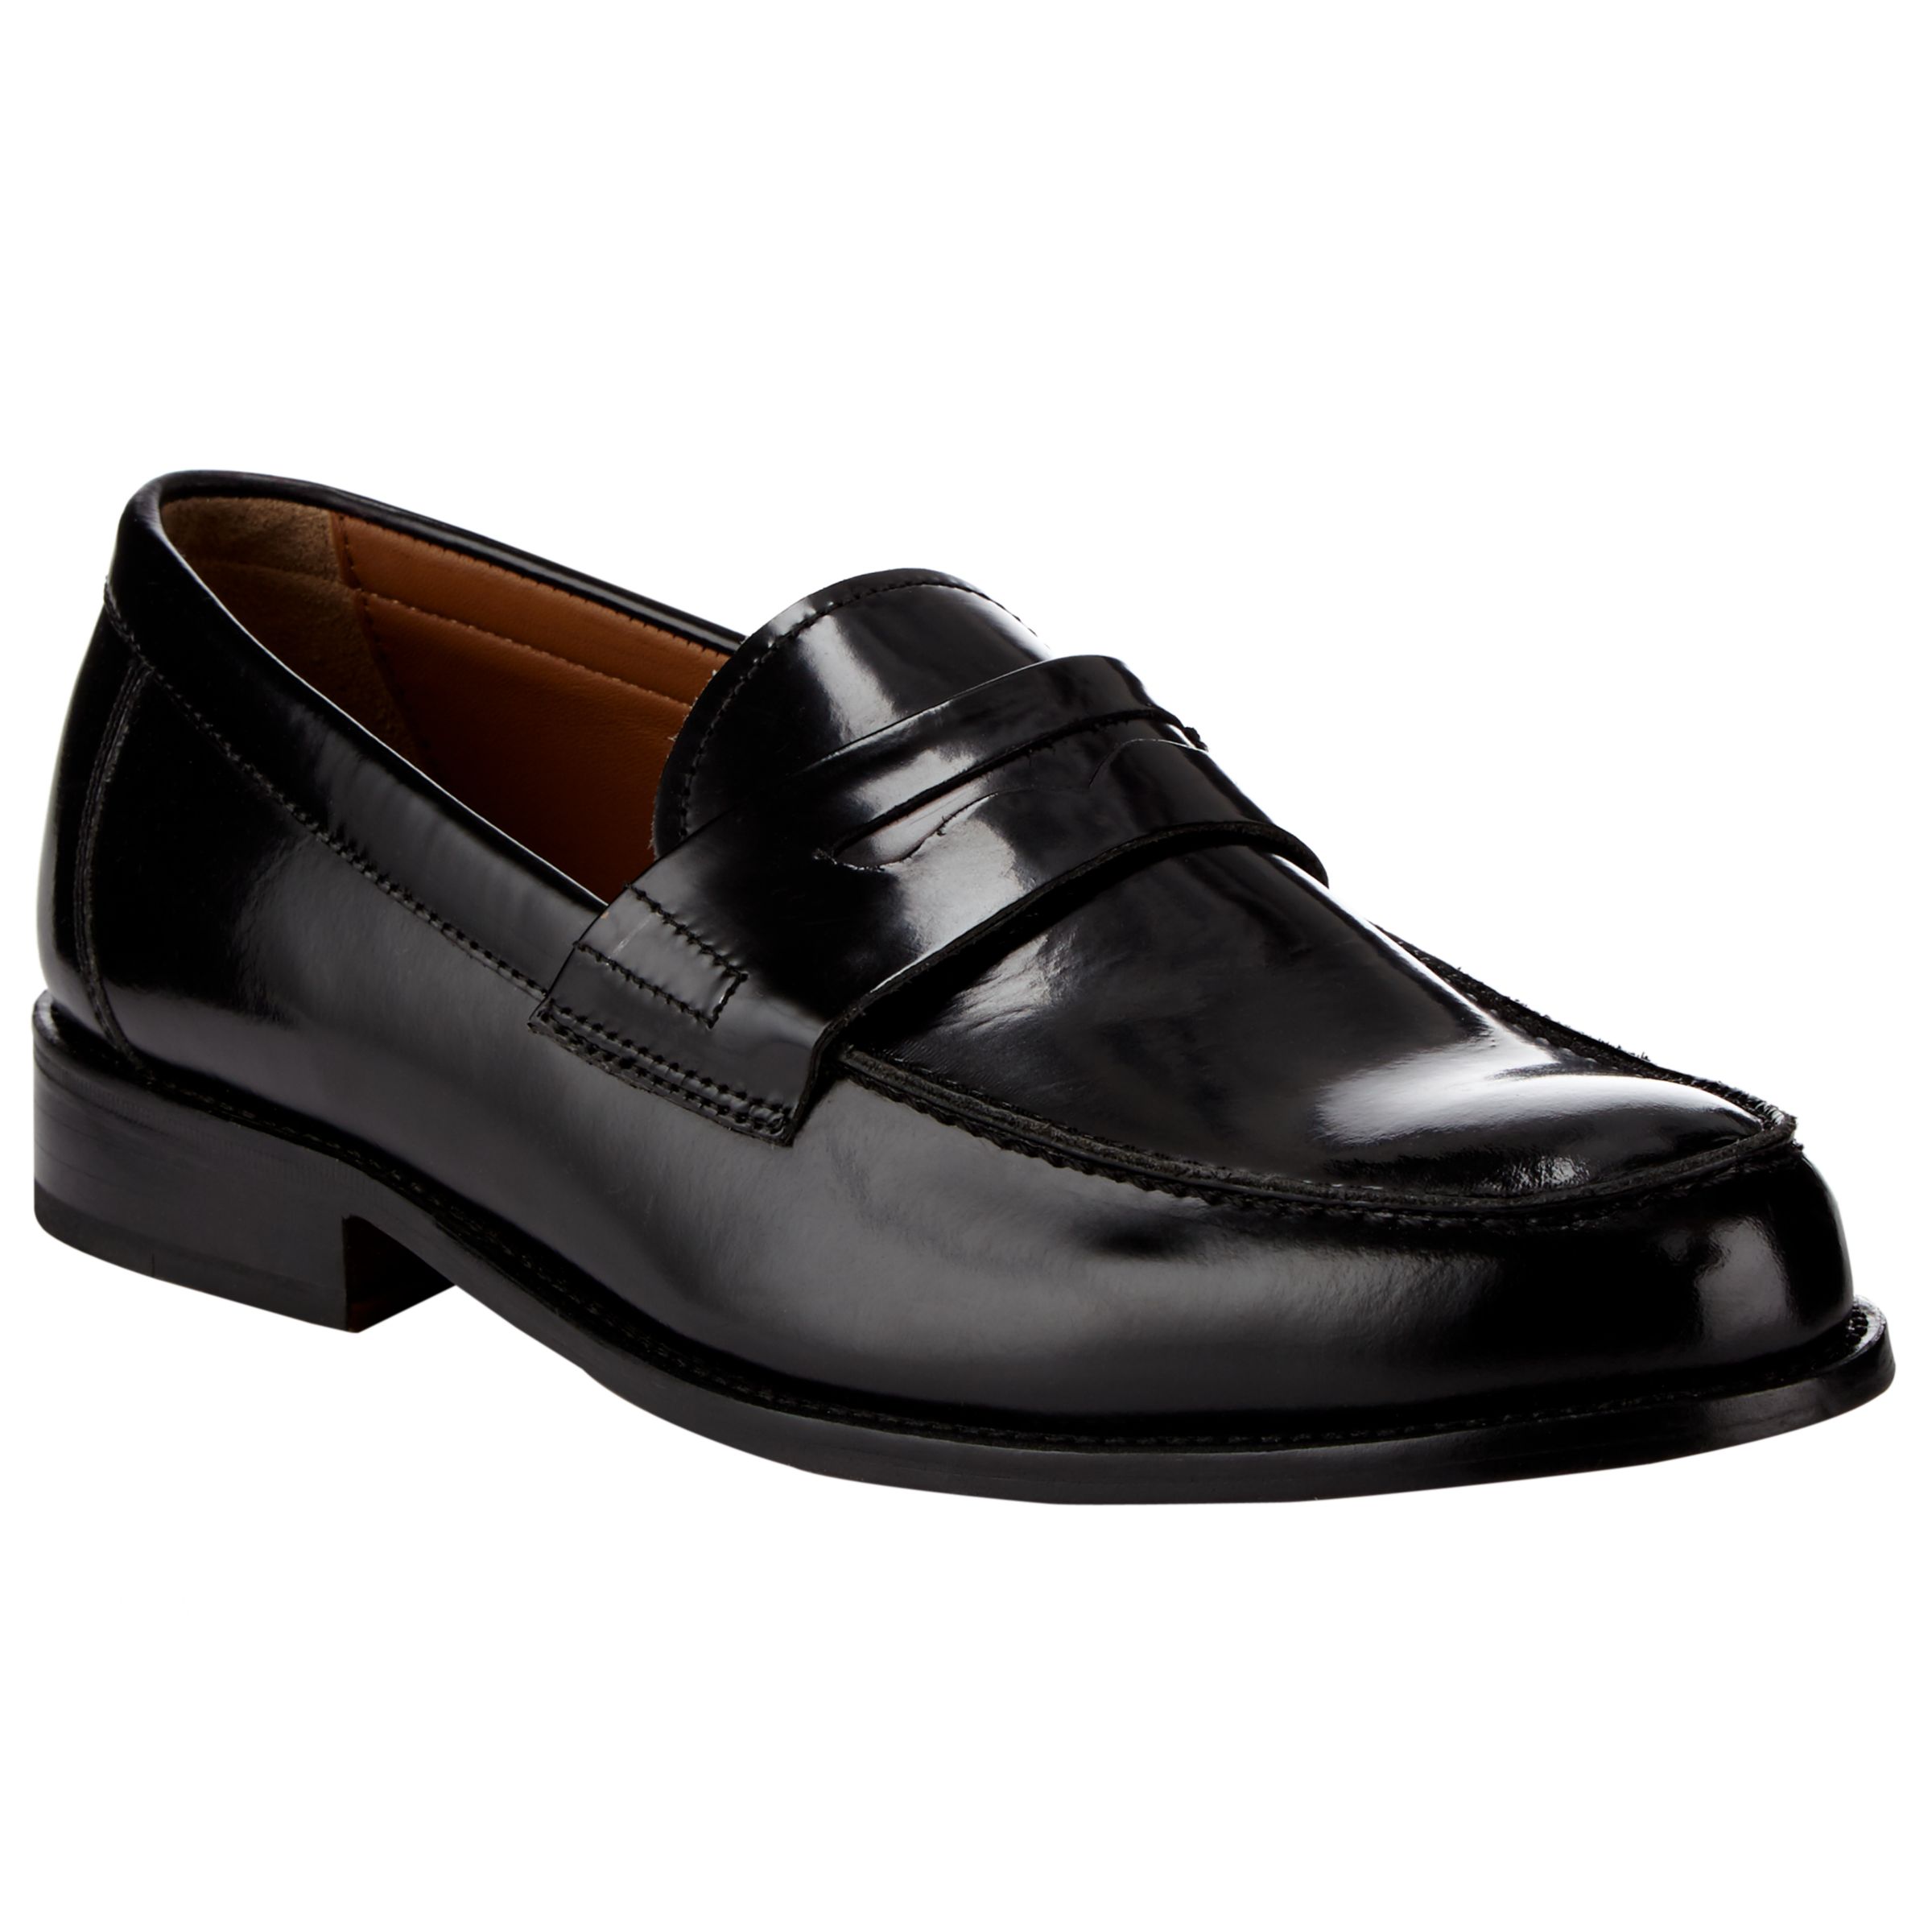 John Lewis & Partners Anderson Loafers, Black